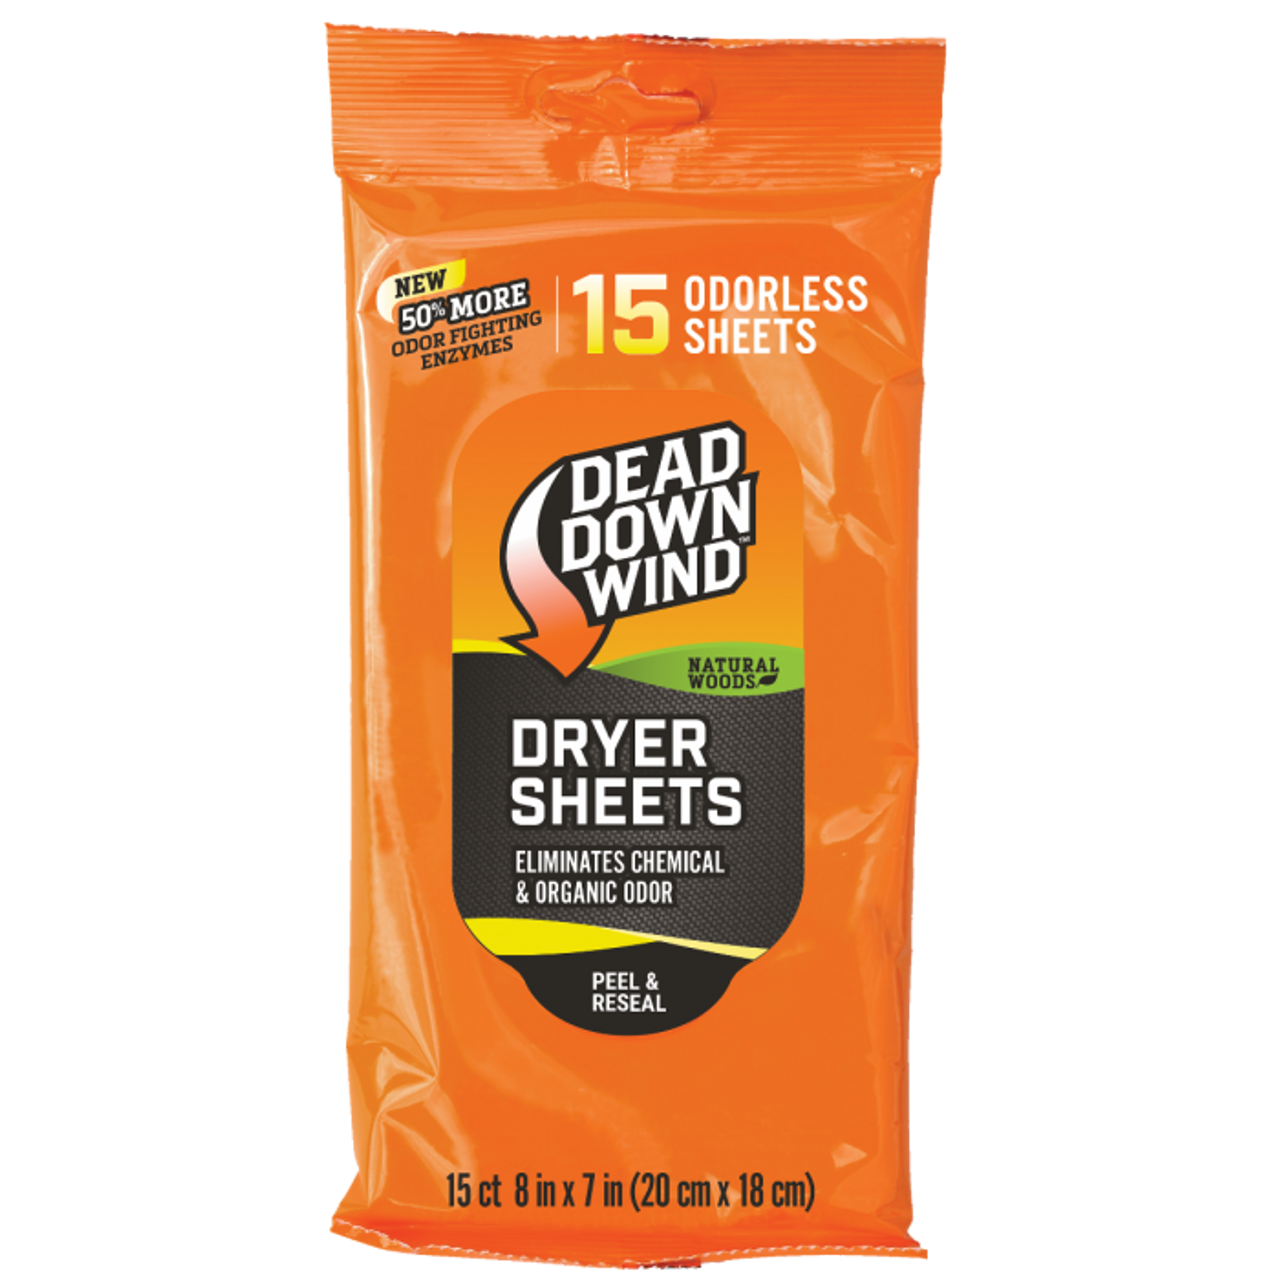 Dead Down Wind Dryer Sheets, Natural Woods